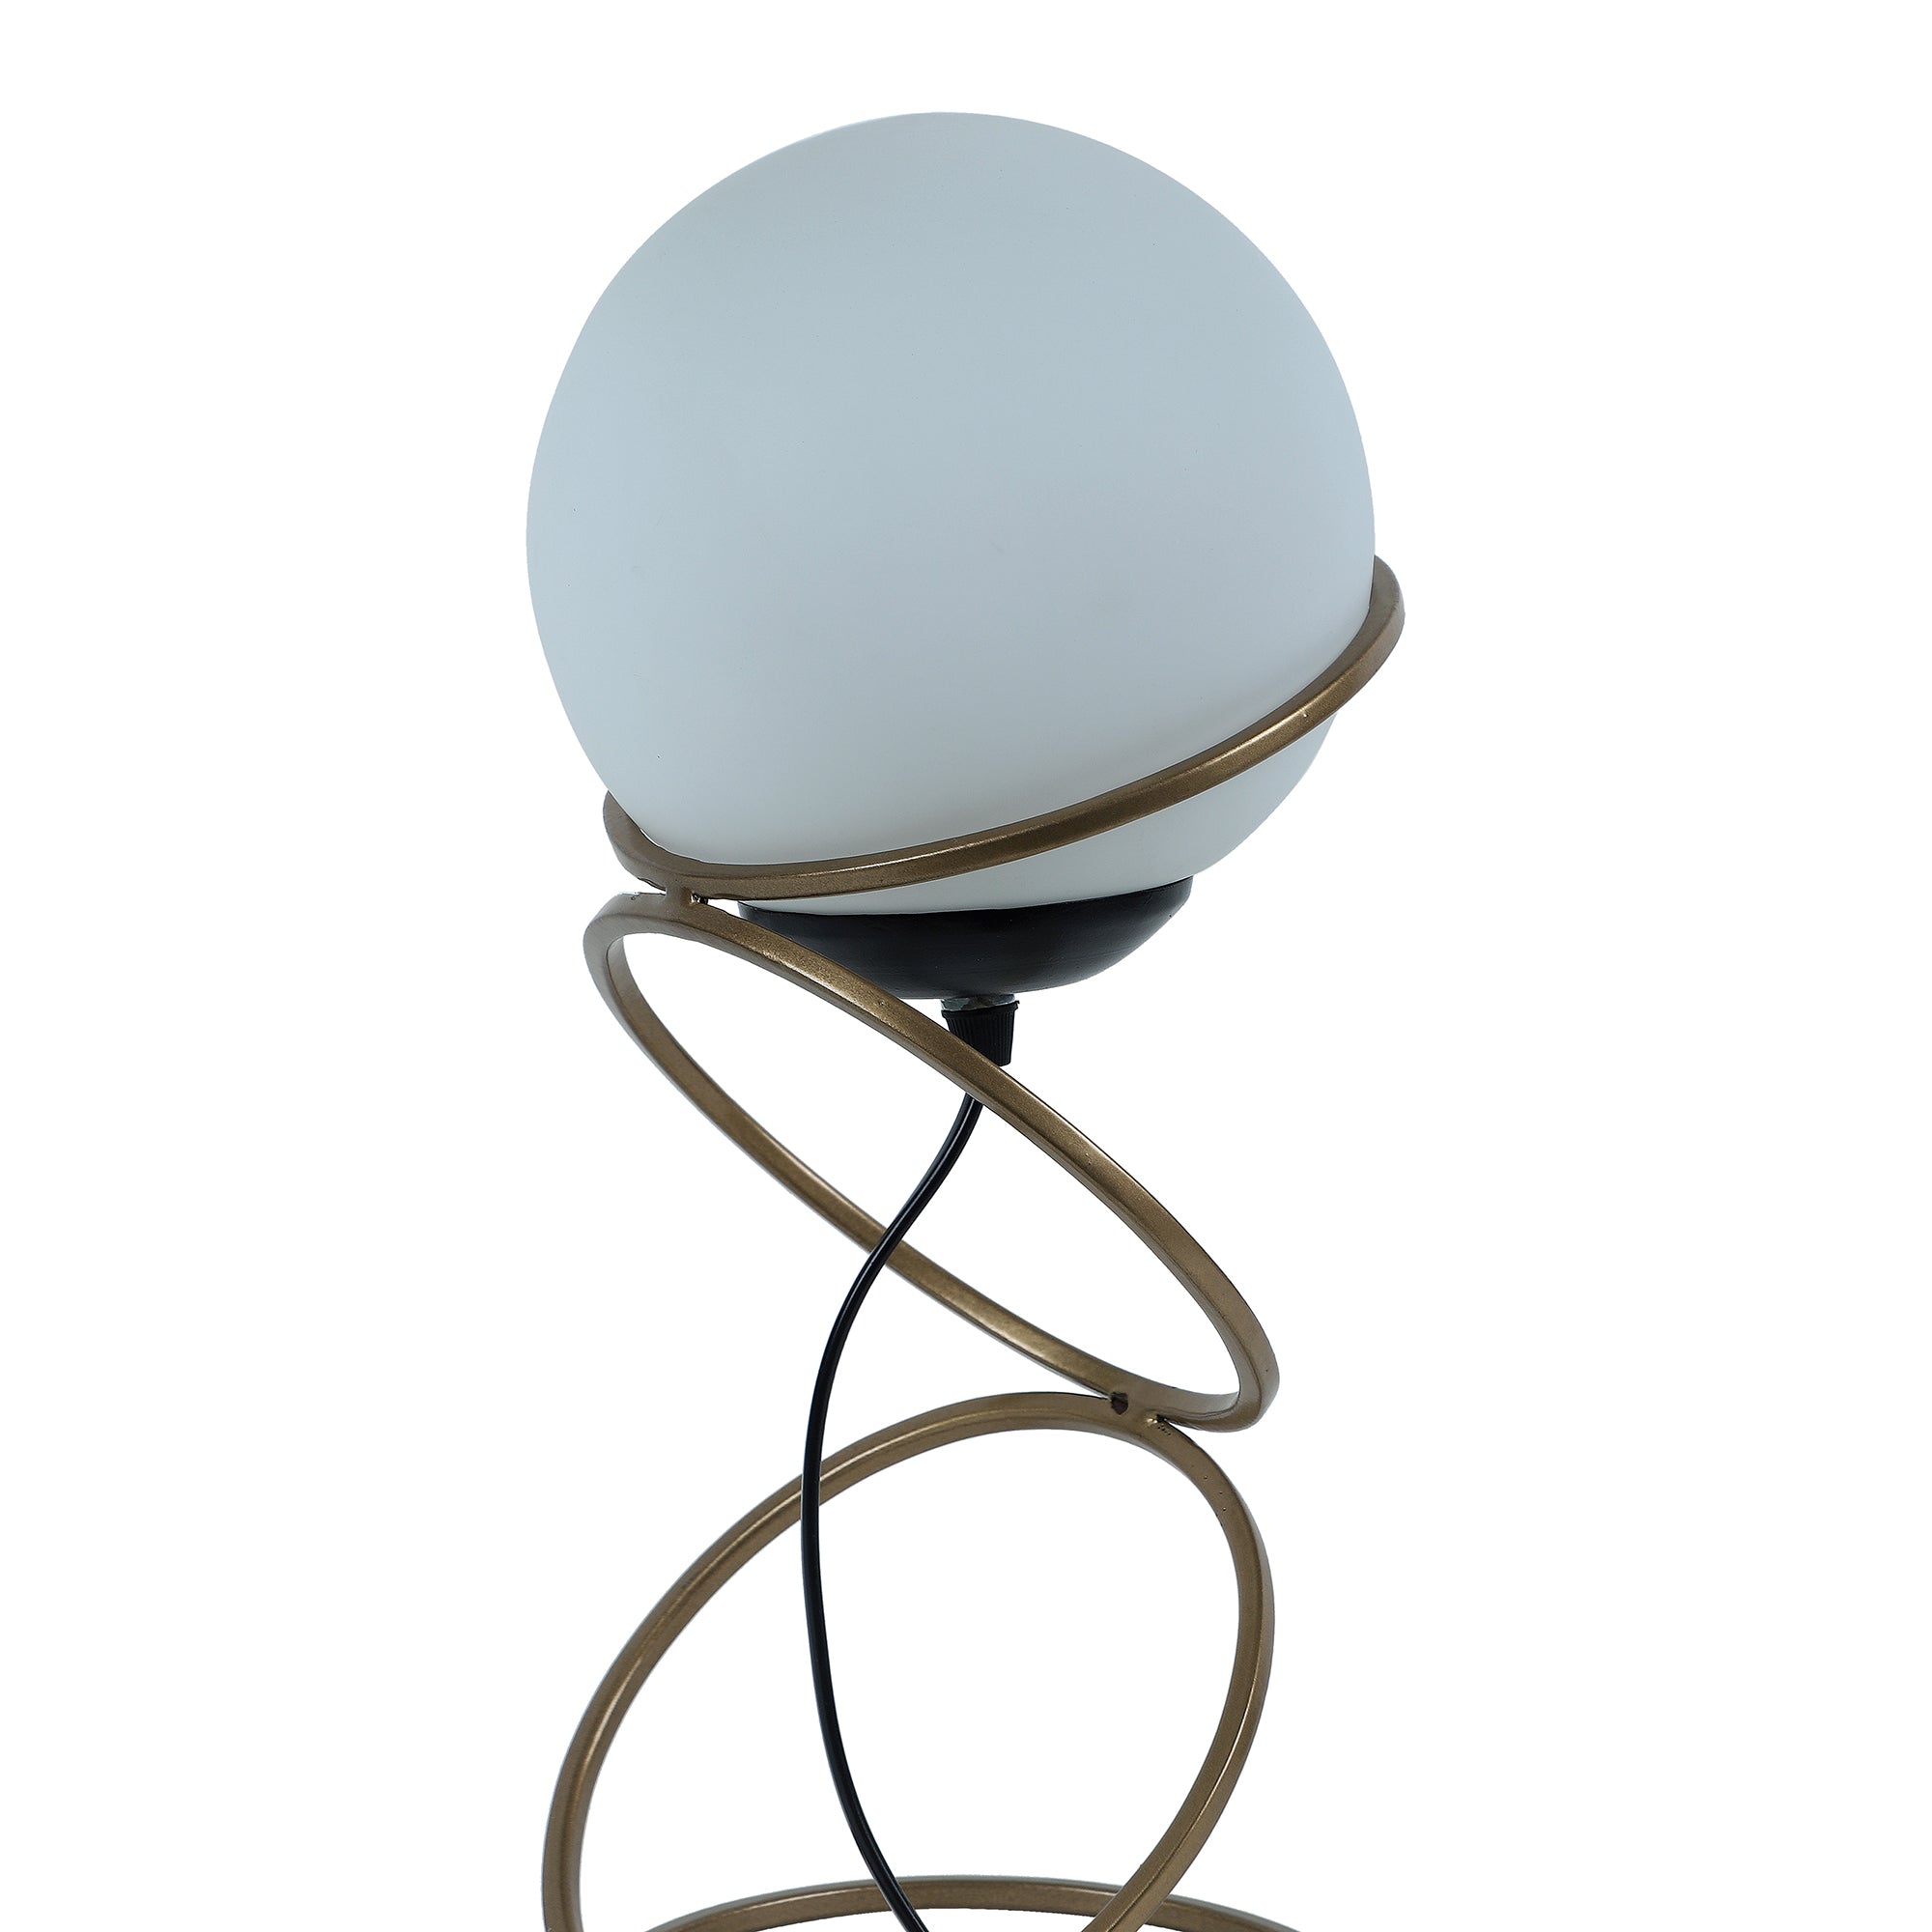 Lucca Gold Table Lamp With Metal Base By SS Lightings